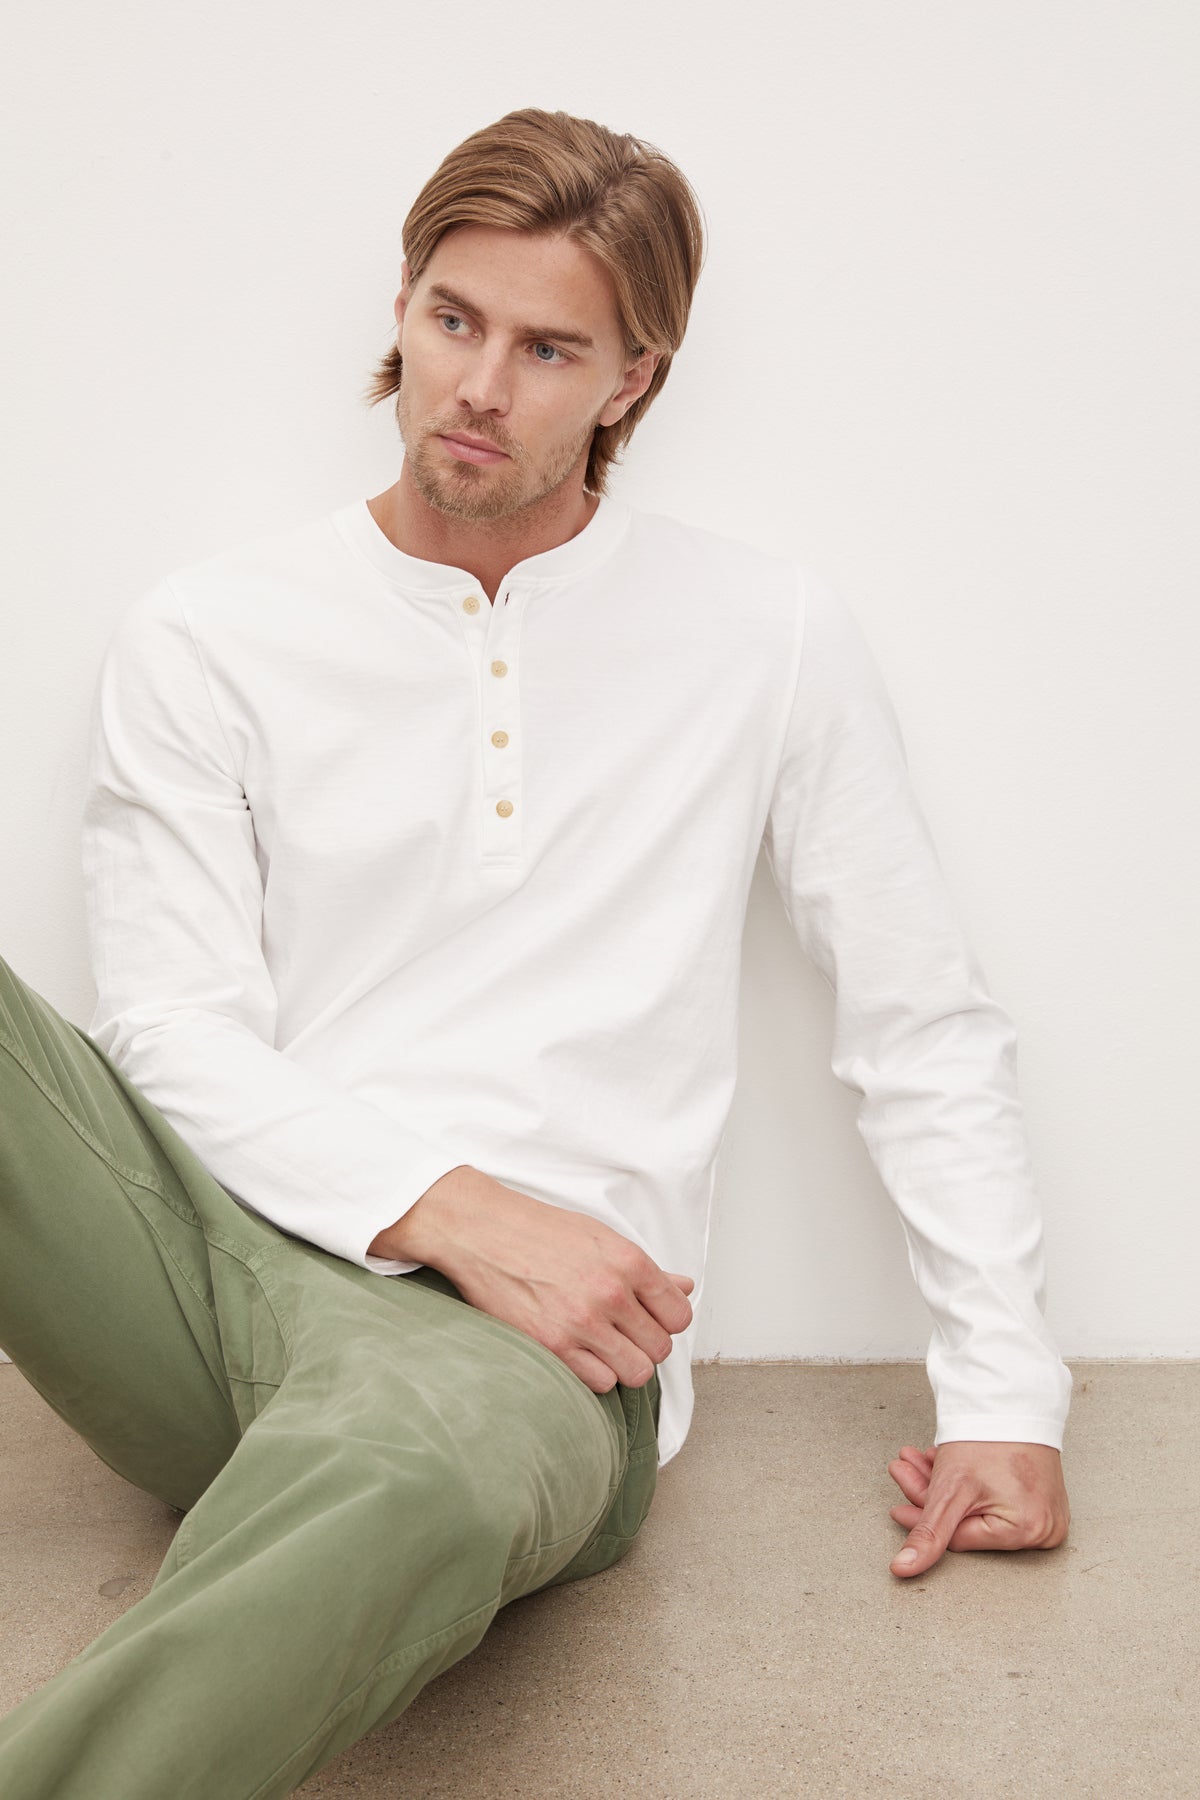 A young man with blond hair wearing a white long-sleeve cotton Velvet by Graham & Spencer HOLT HENLEY henley shirt and olive green pants, sitting against a white wall, looking to his left.-36009940418753